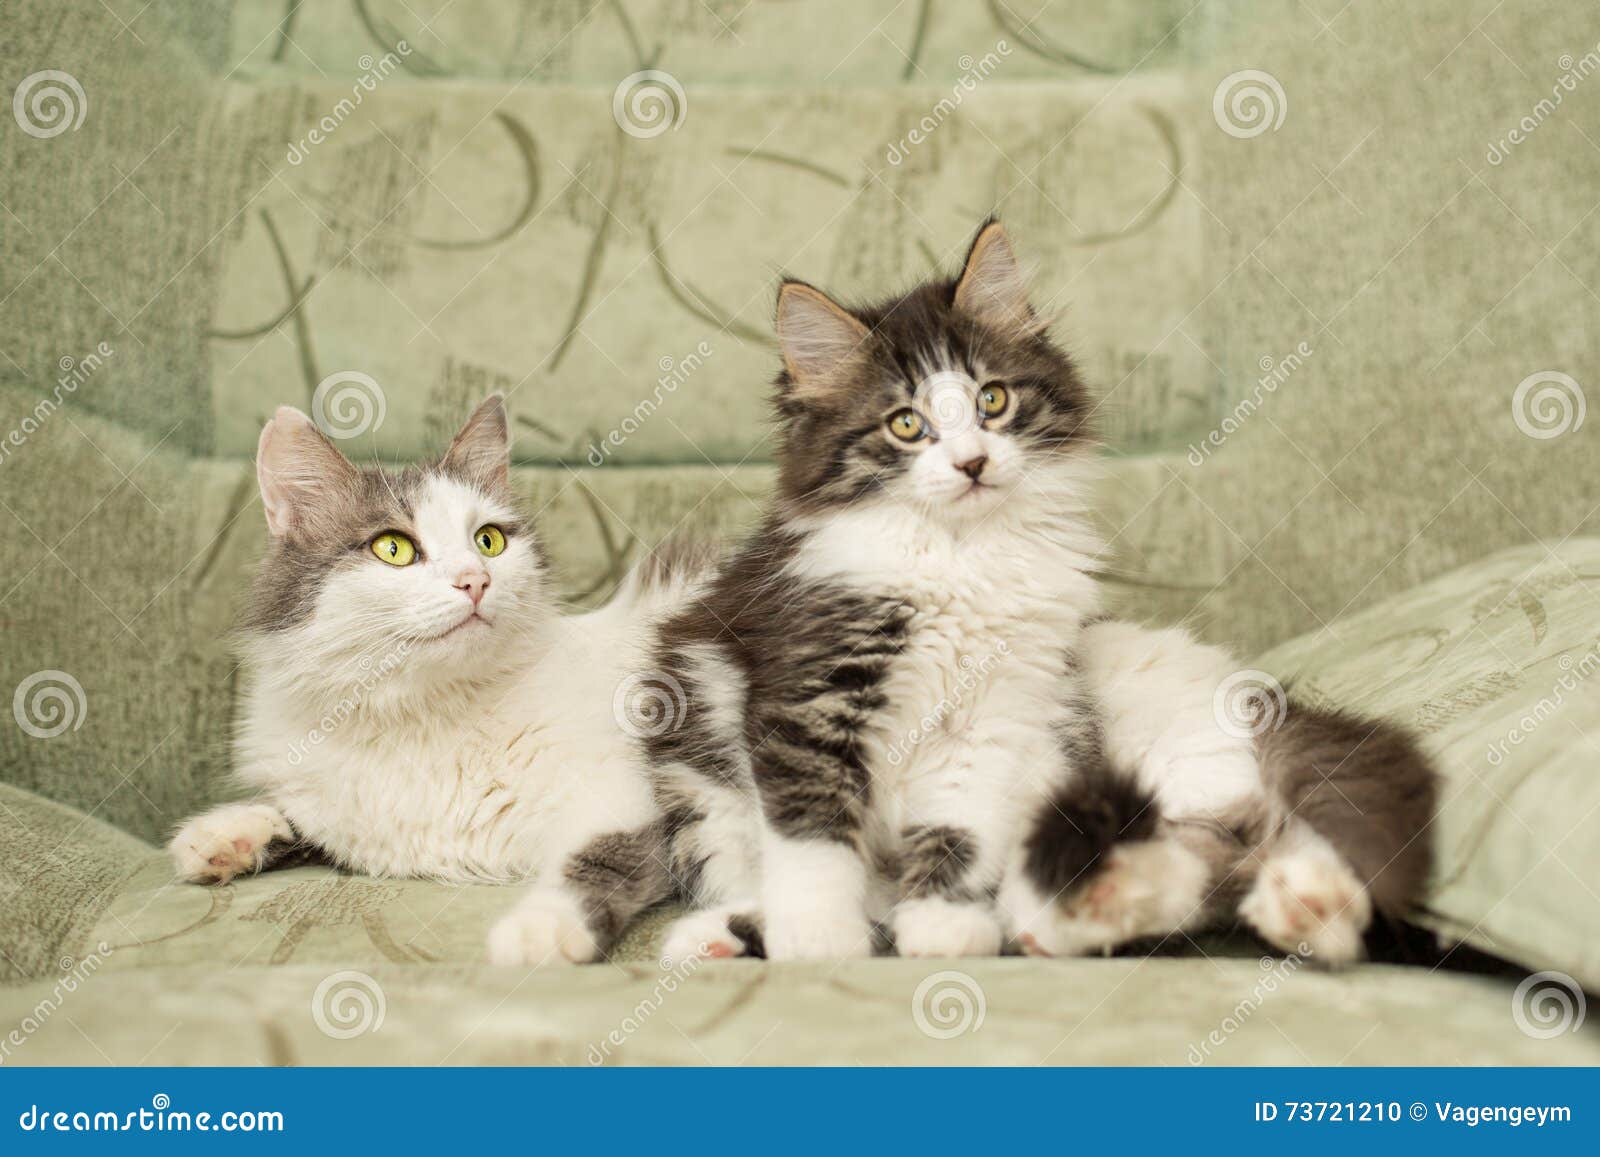 Mum cat and a cute kitten stock photo. Image of expression - 73721210